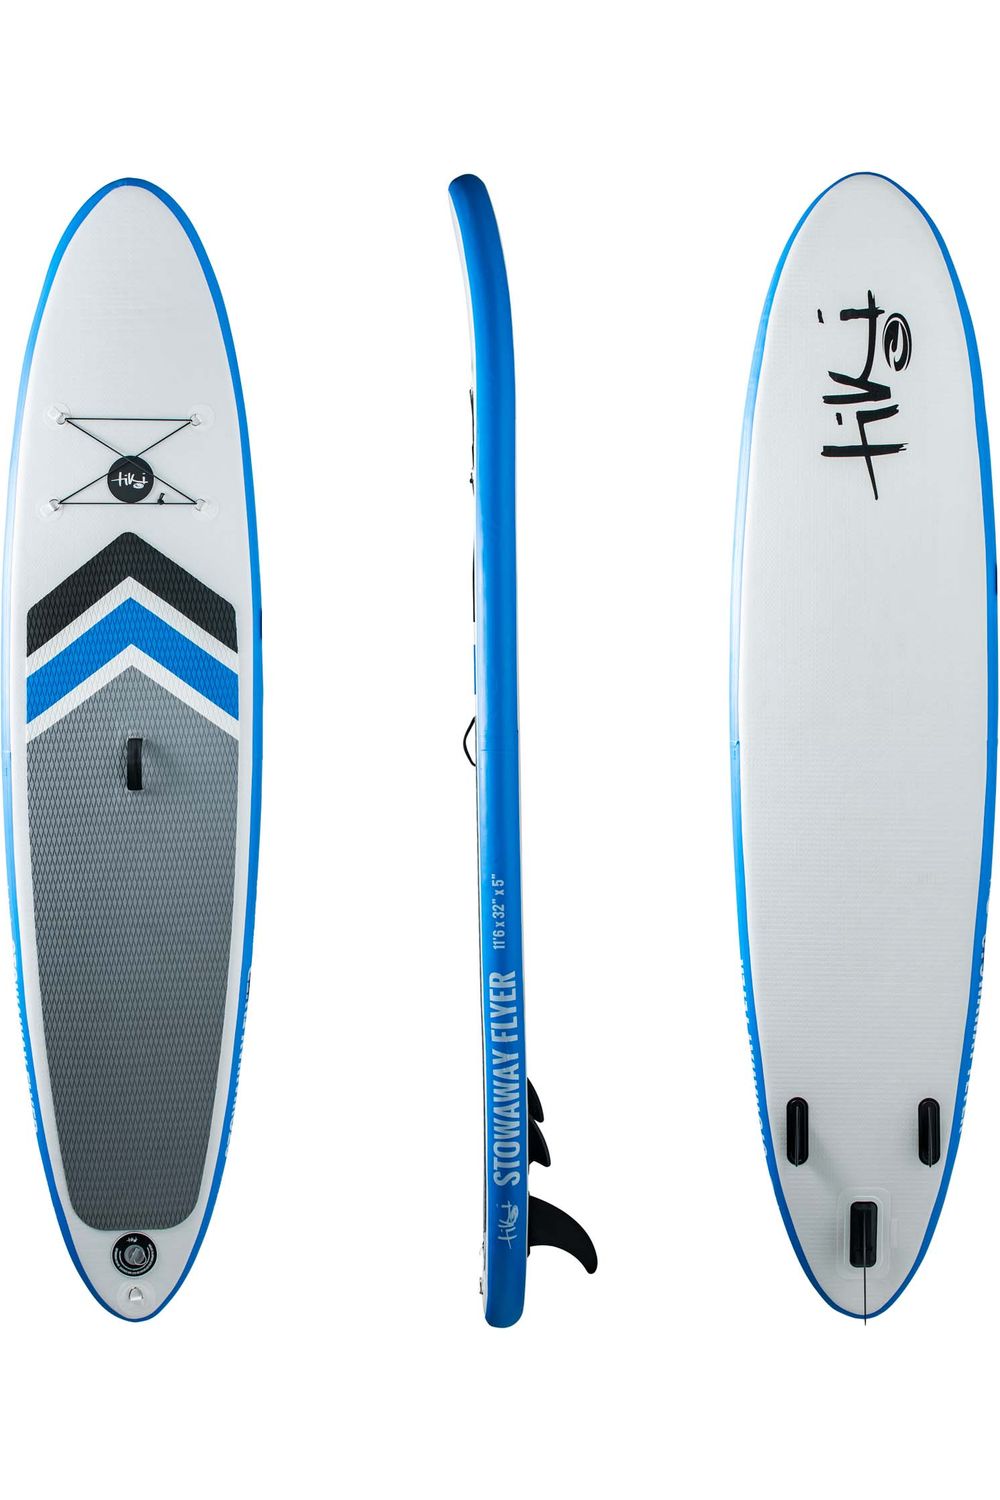 Tiki 11'6 Stowaway Flyer Inflatable Sup + Accessories Pack With Paddle